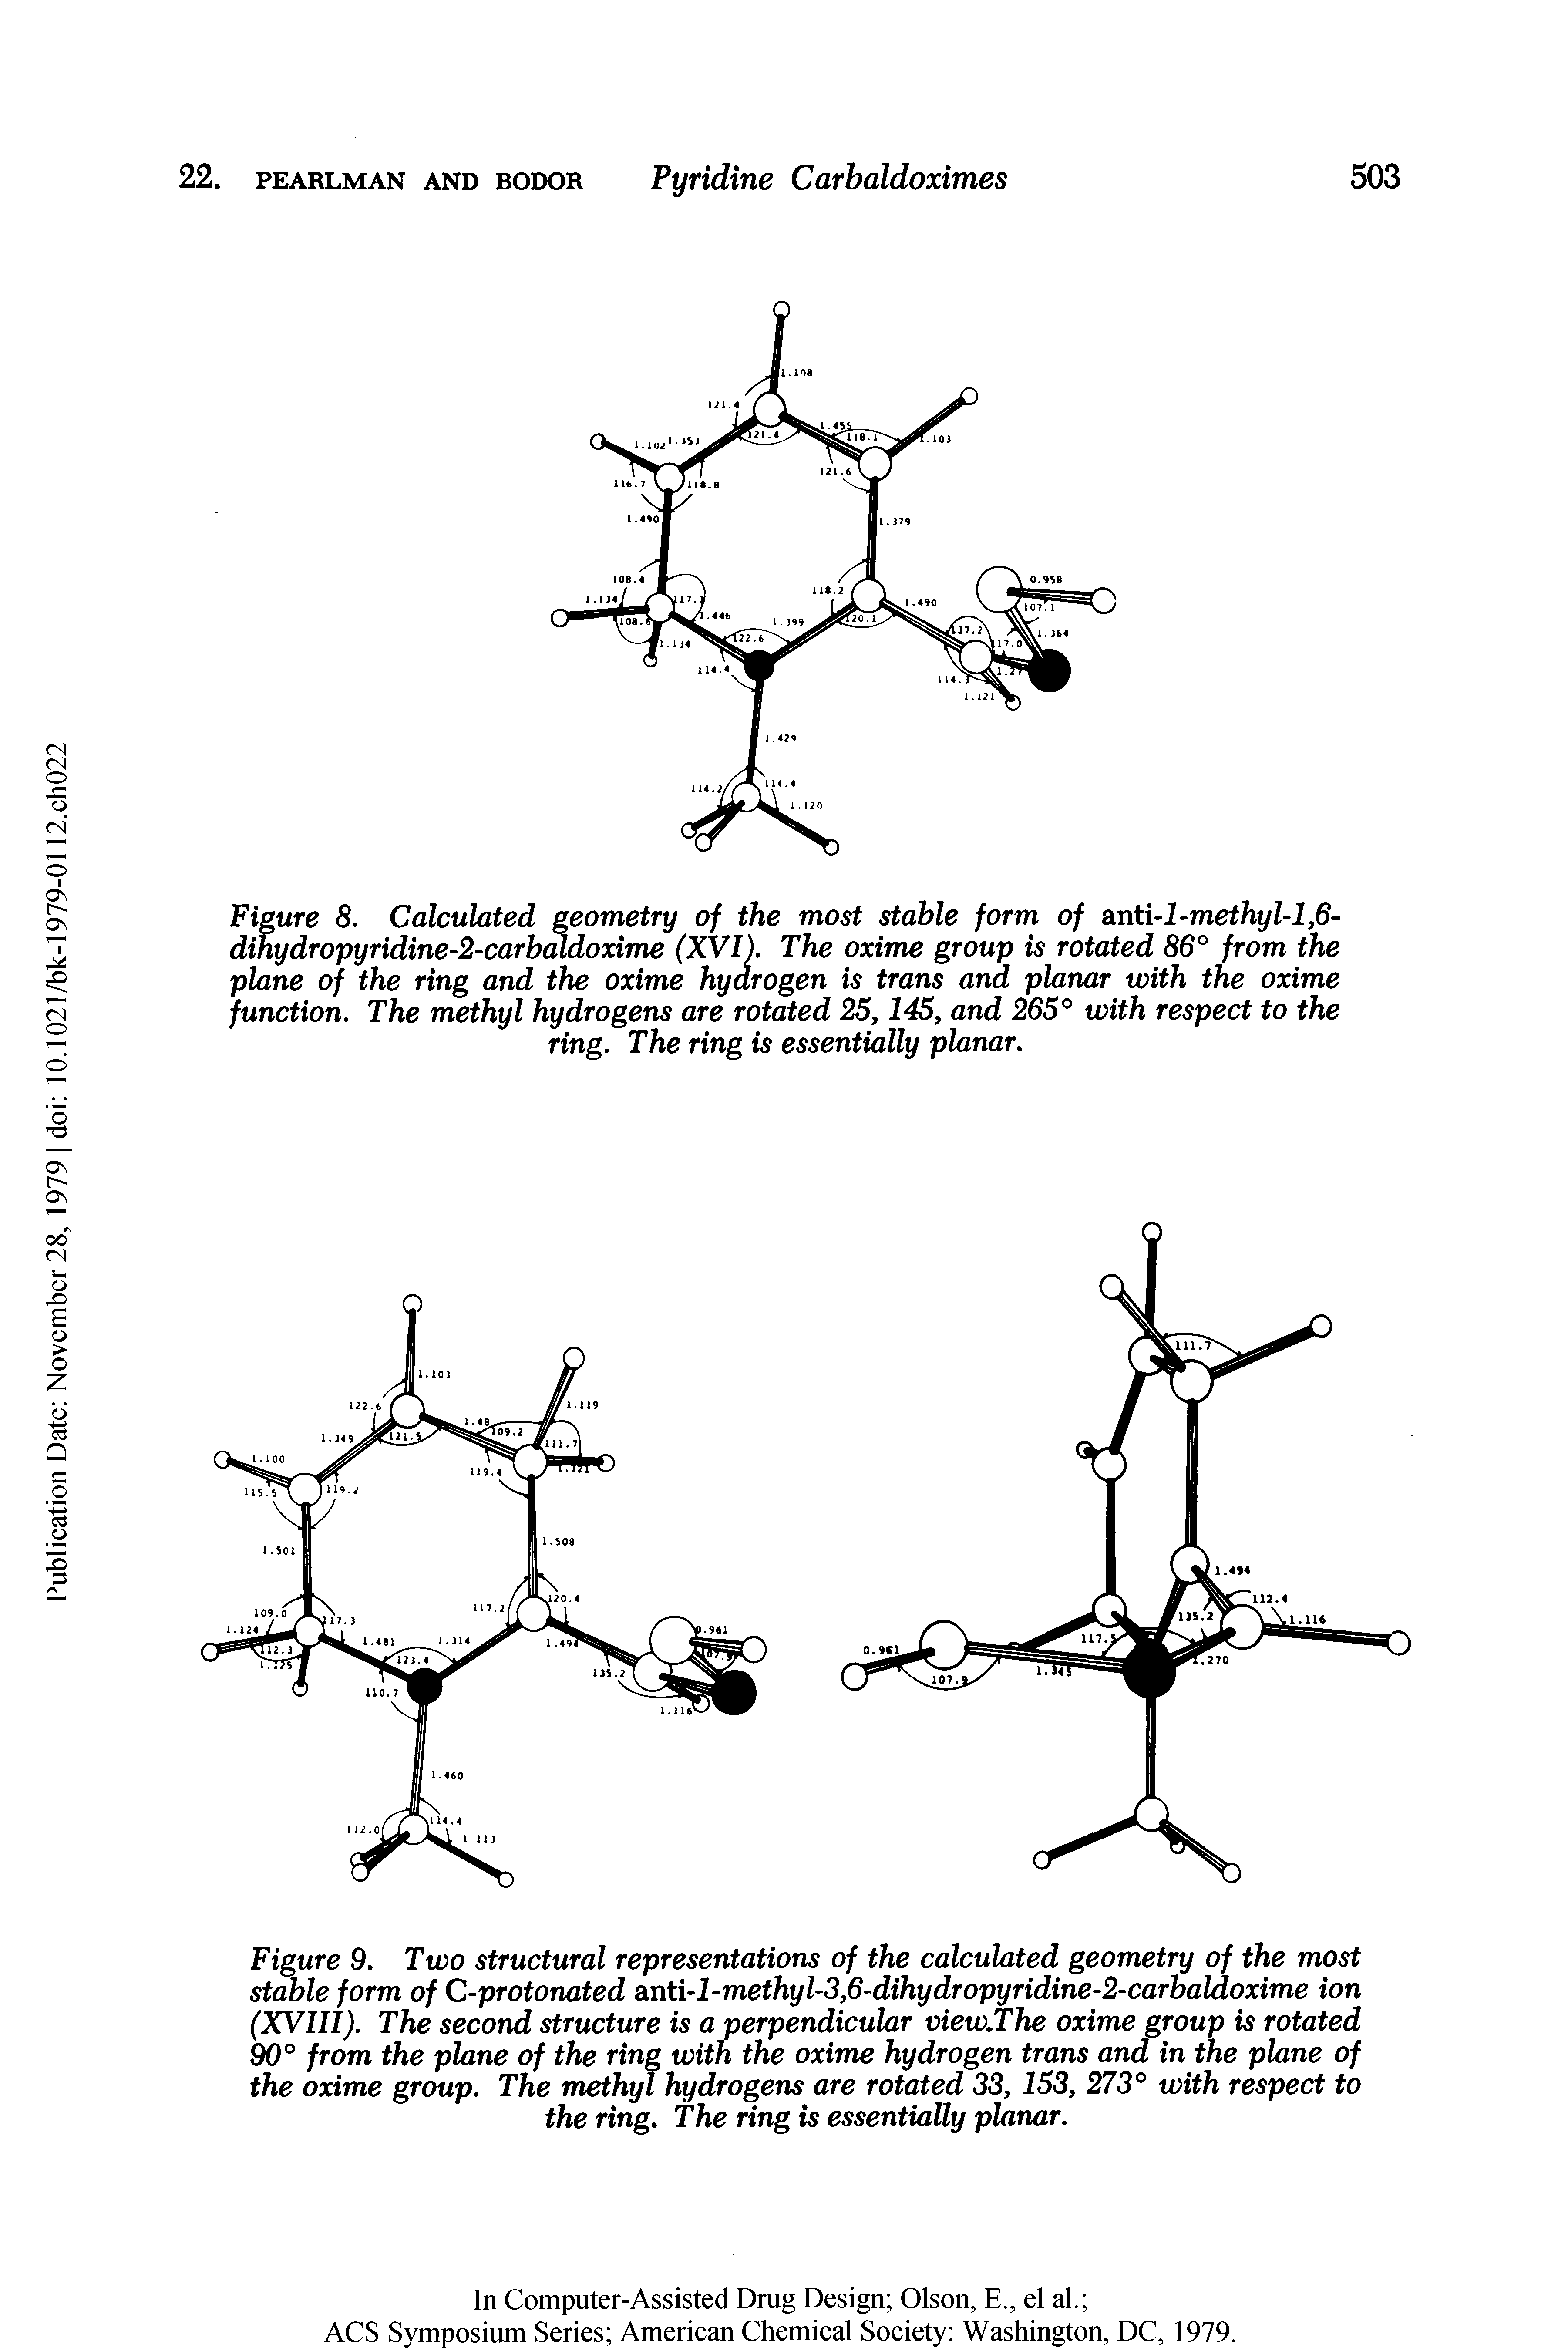 Figure 9. Two structural representations of the calculated geometry of the most stable form of C-protonated a.nti-1-methyl-3,6-dihydropyridine-2-carbaldoxime ion (XVIII). The second structure is a perpendicular view.The oxime group is rotated 90° from the plane of the ring with the oxime hydrogen trans and in the plane of the oxime group. The methyl hydrogens are rotated 33, 153, 273° with respect to the ring, the ring is essentially planar.